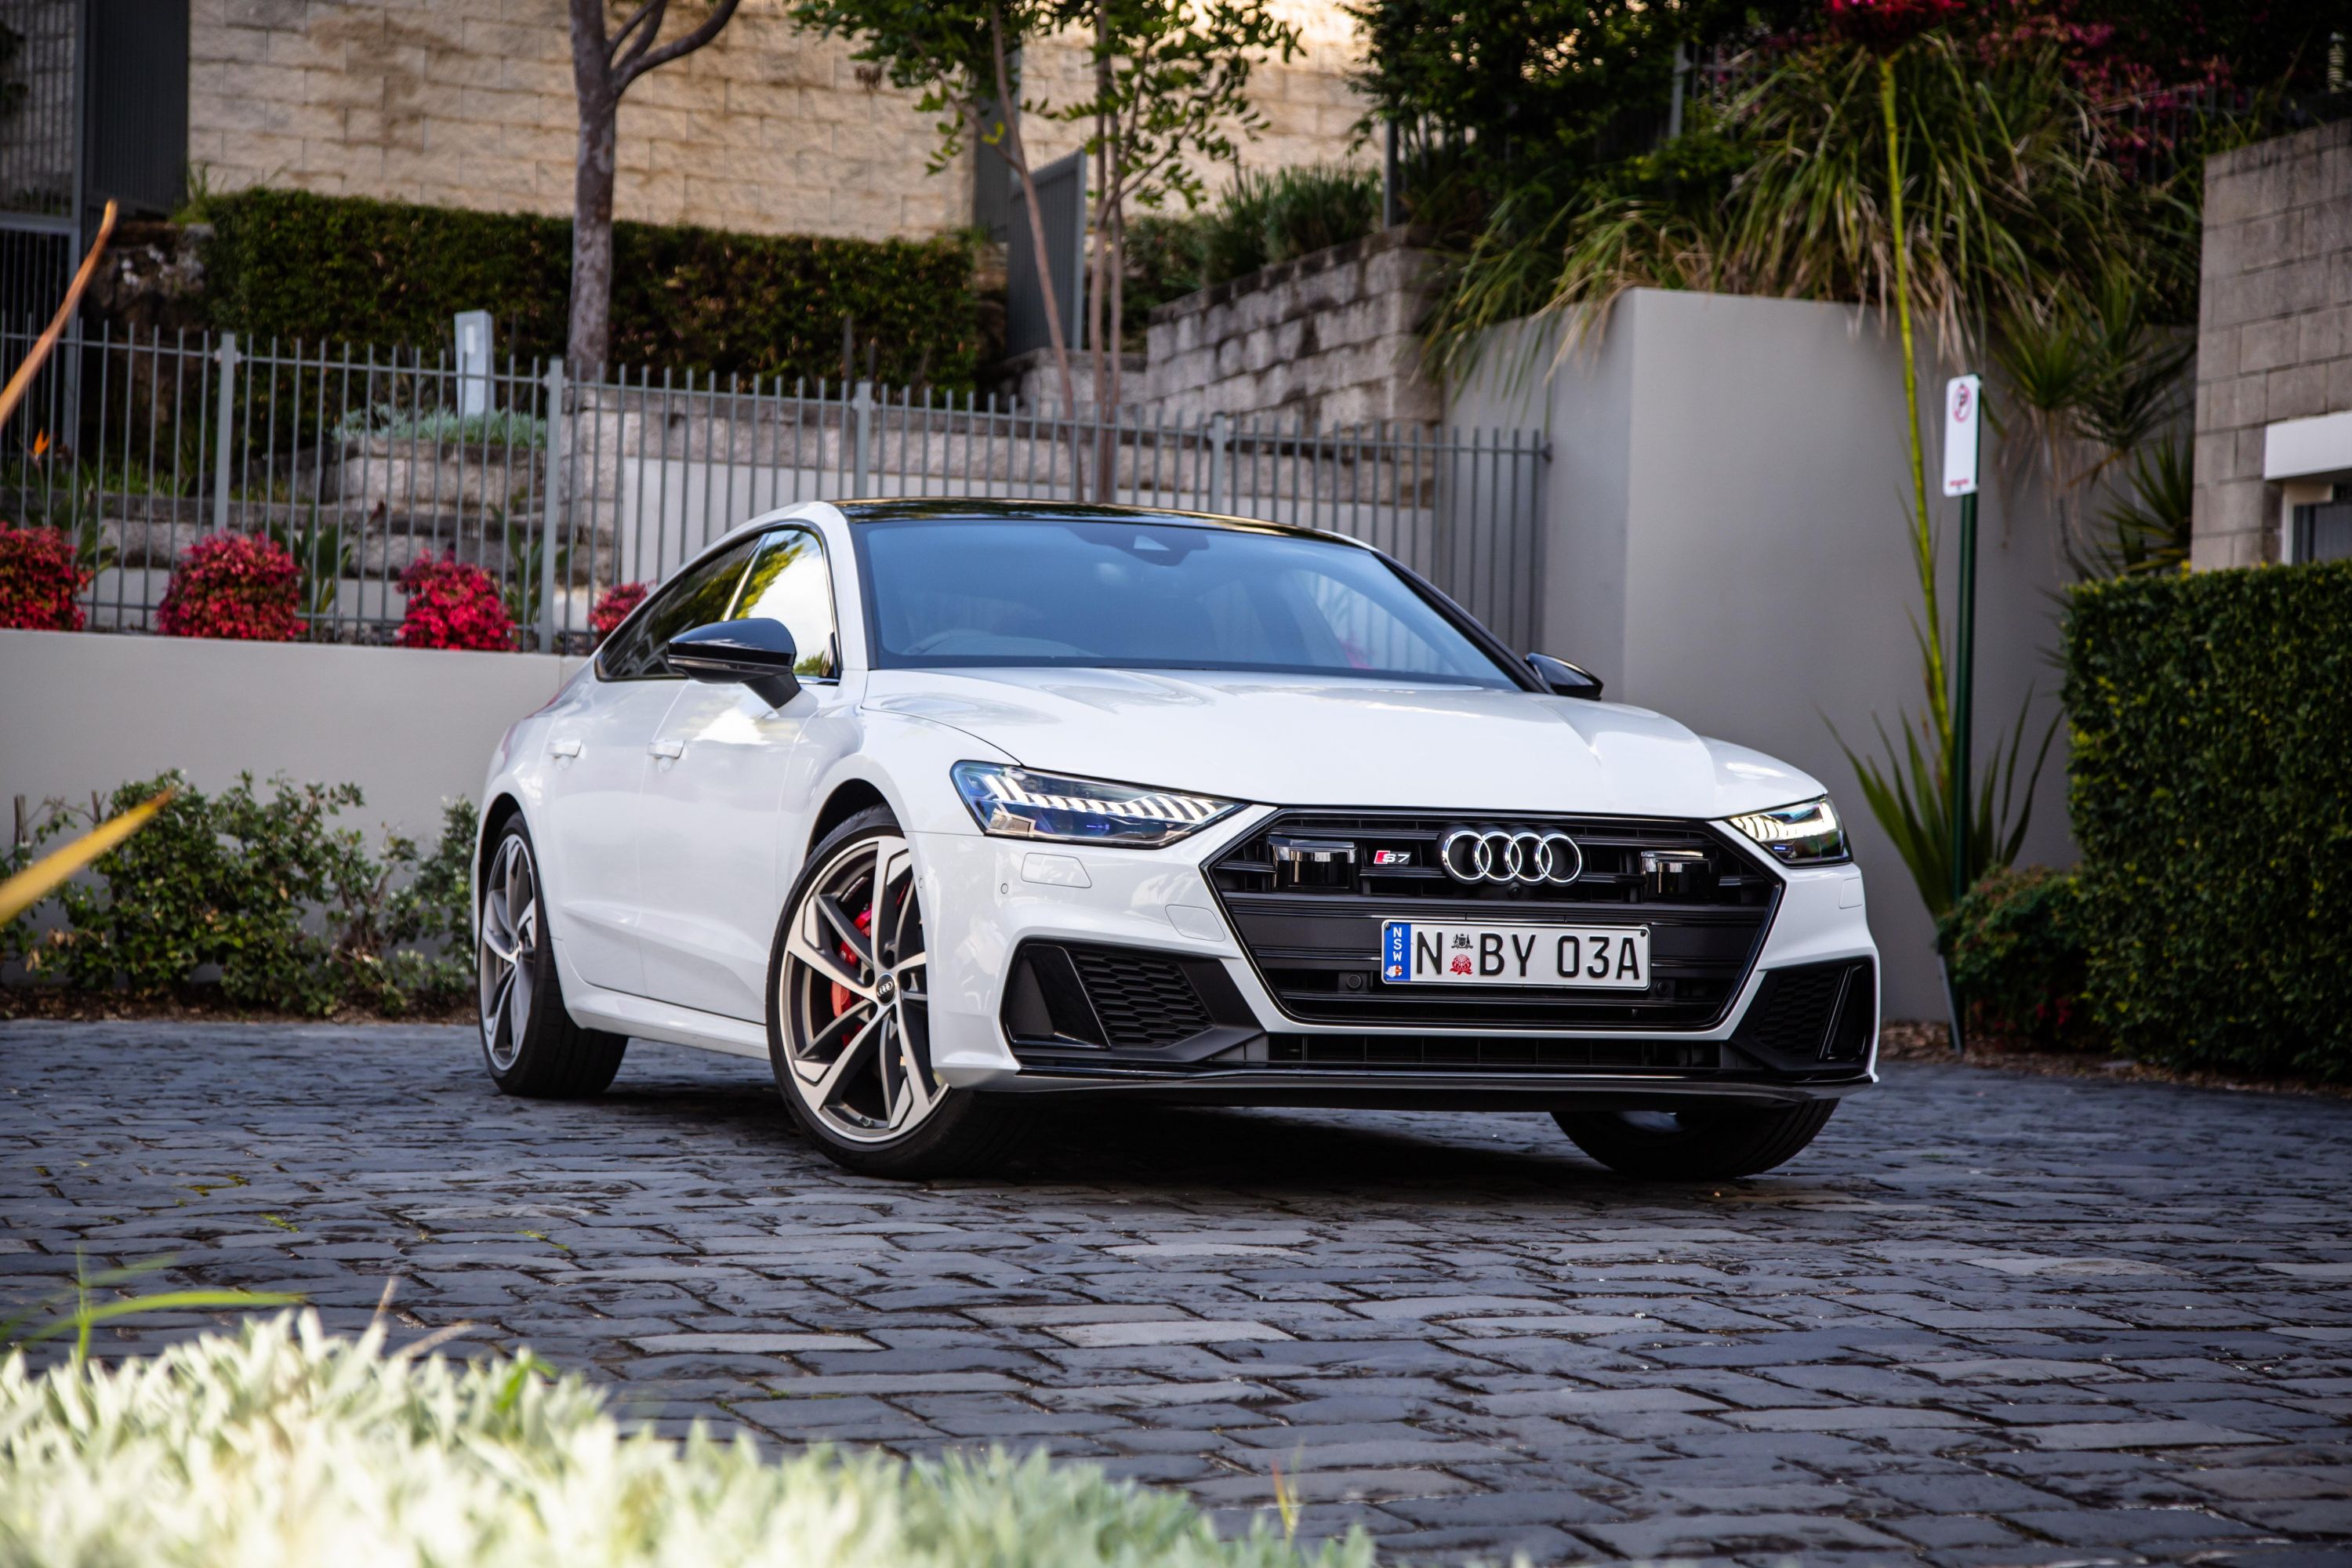 2021 Audi S7 Sportback Review  Power, Performance And Luxury